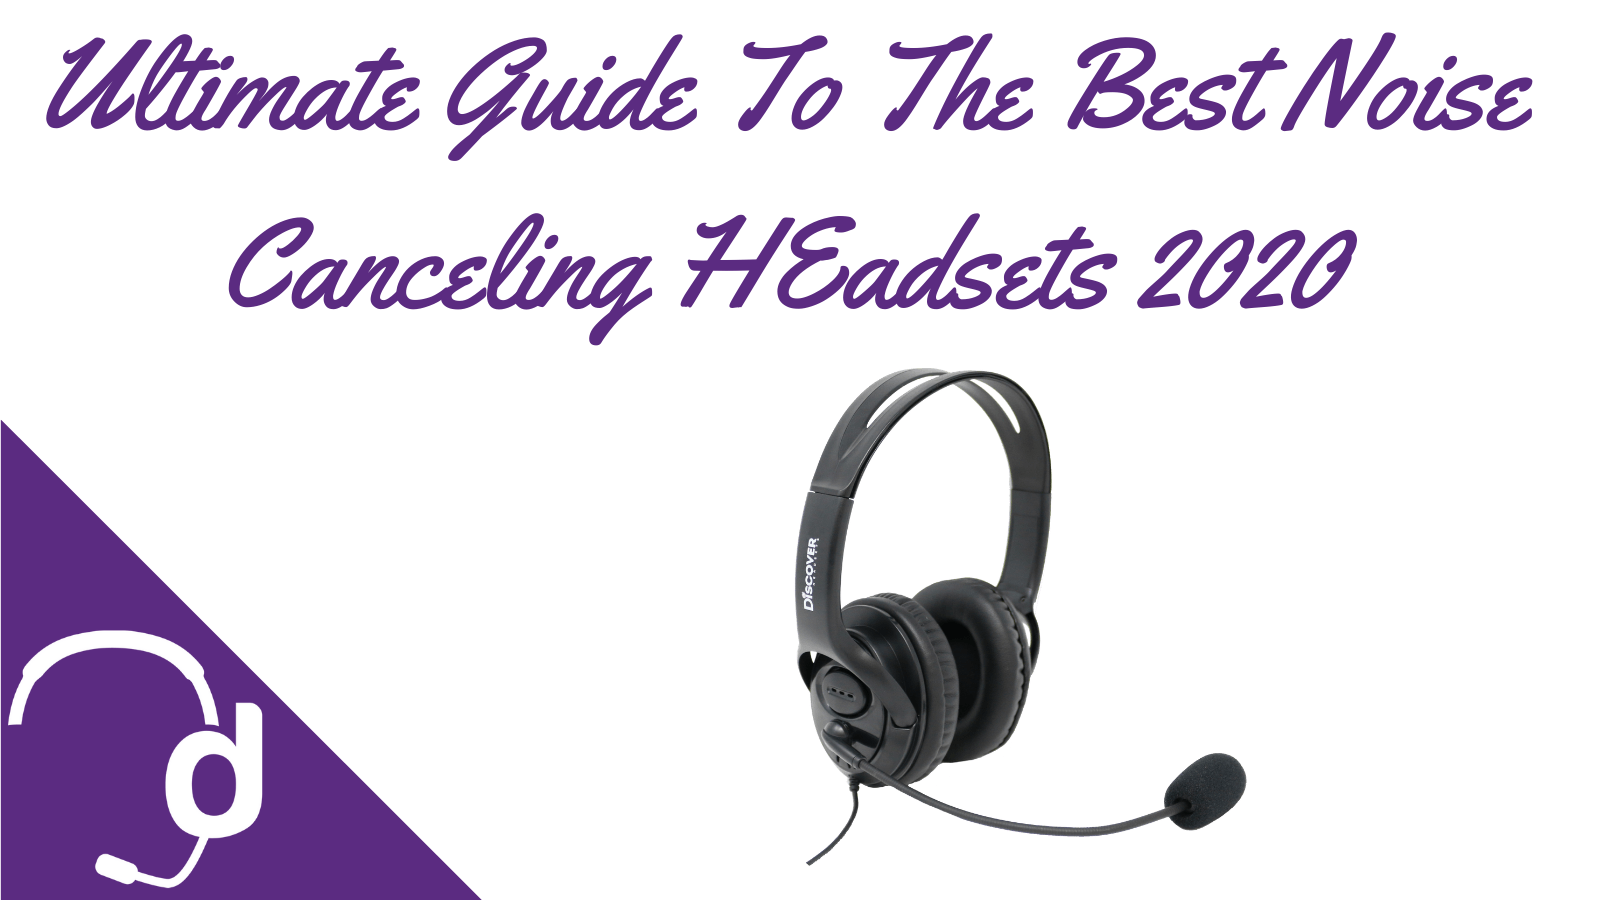 The Ultimate Guide To The Best Noise Canceling Headsets For Your Office and Call Center in 2020 - Headset Advisor